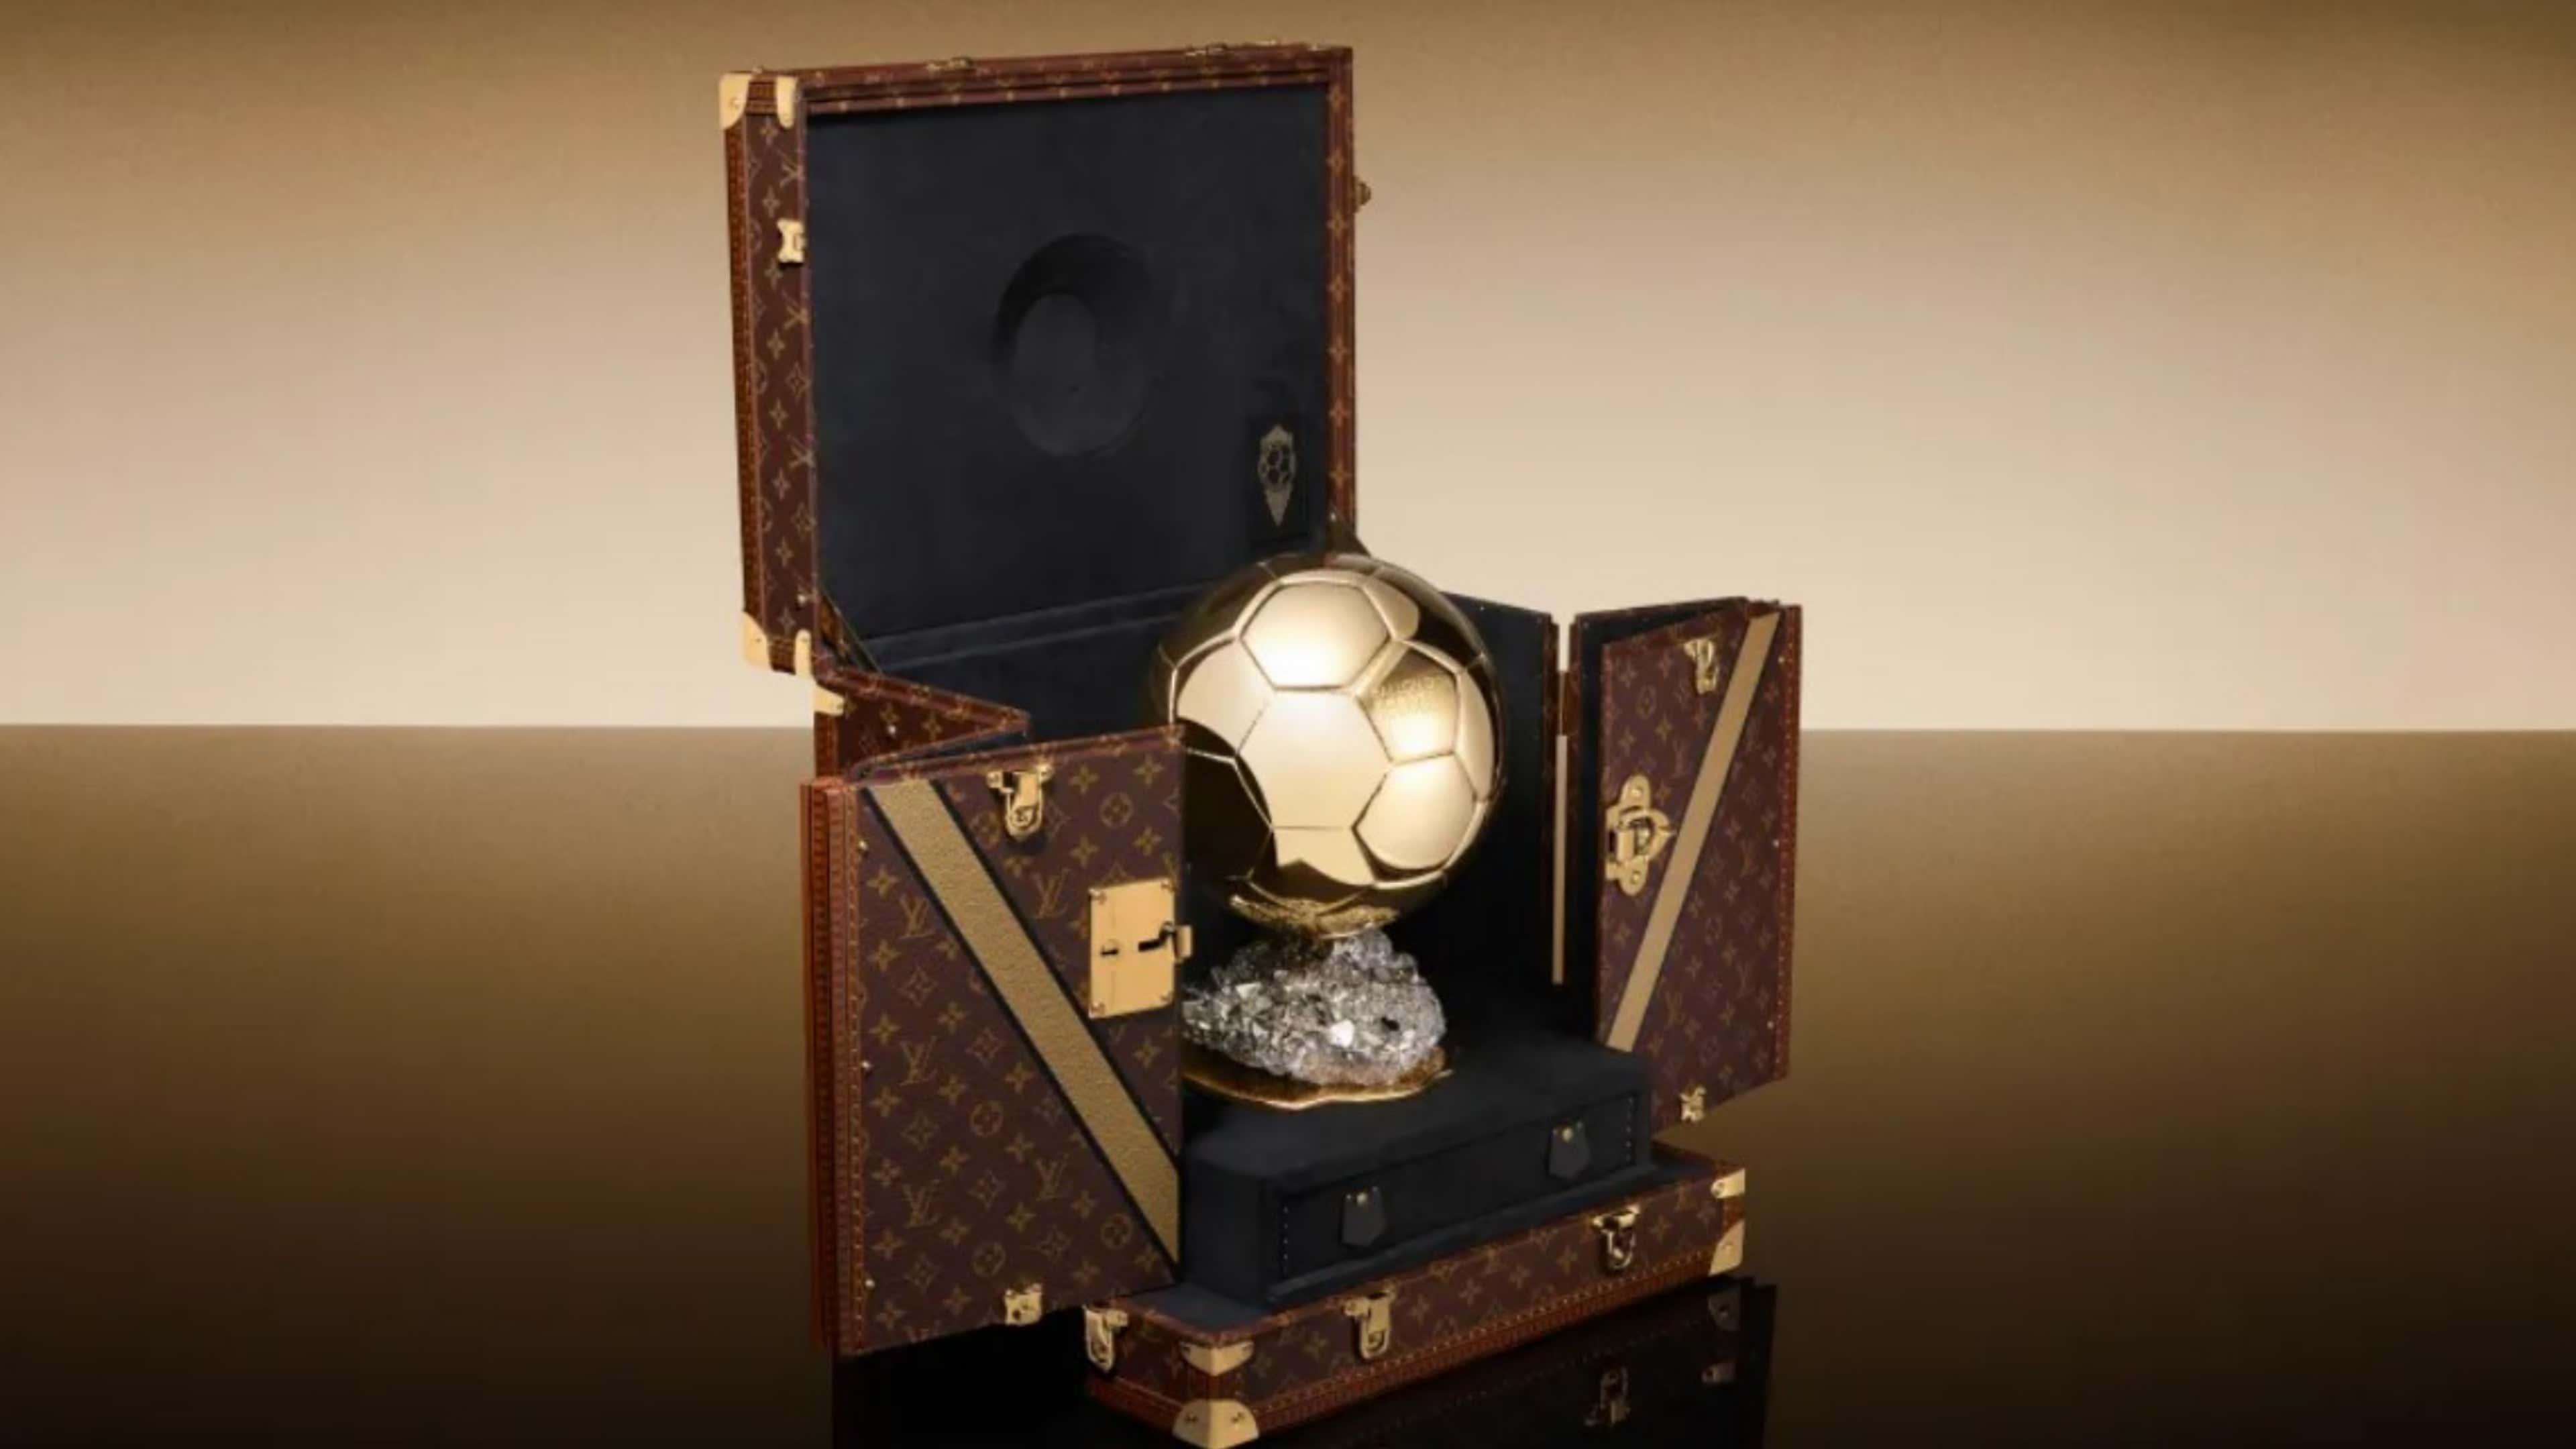 What is the Ballon d'Or trophy worth? Value, material, size